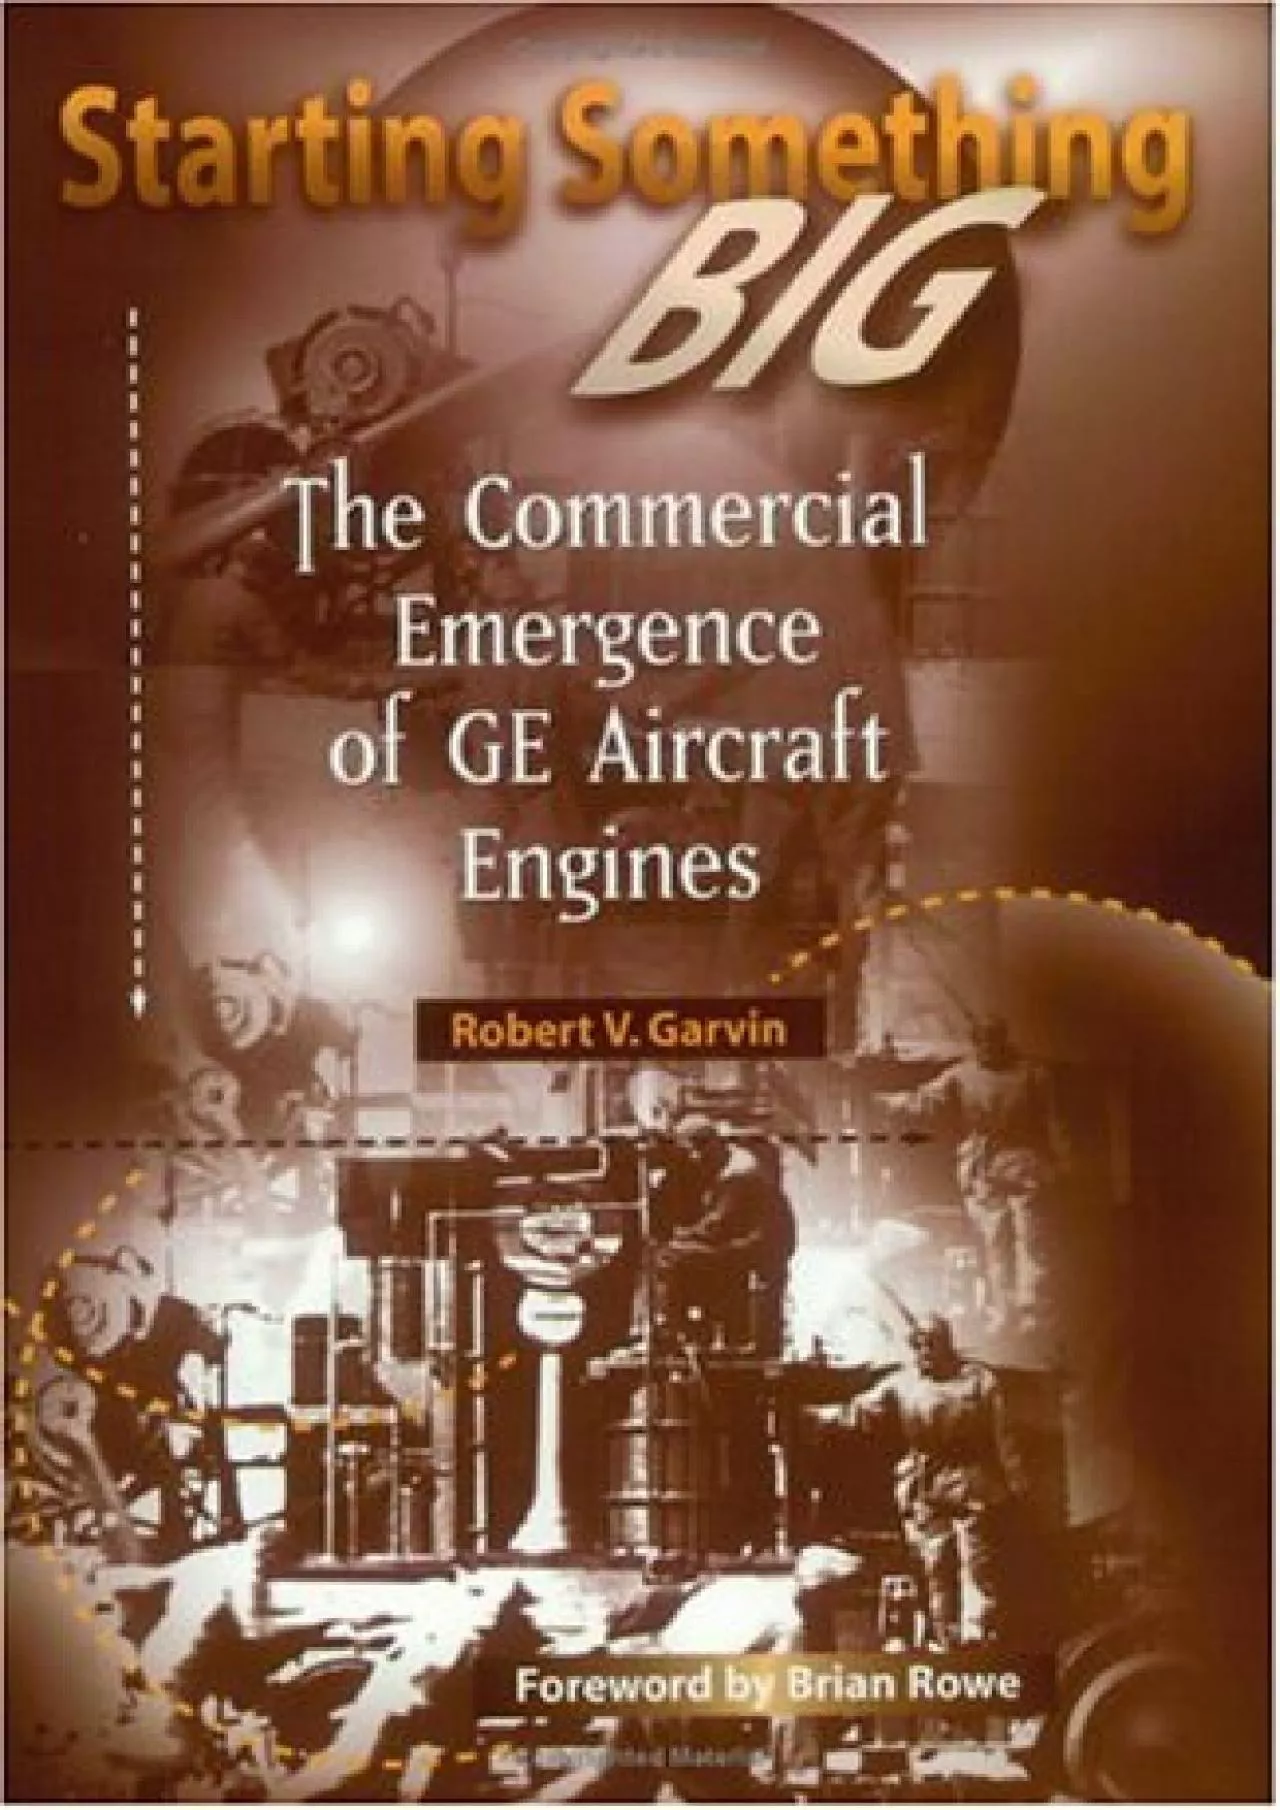 (DOWNLOAD)-Starting Something Big: The Commercial Emergence of GE Aircraft Engines (Library